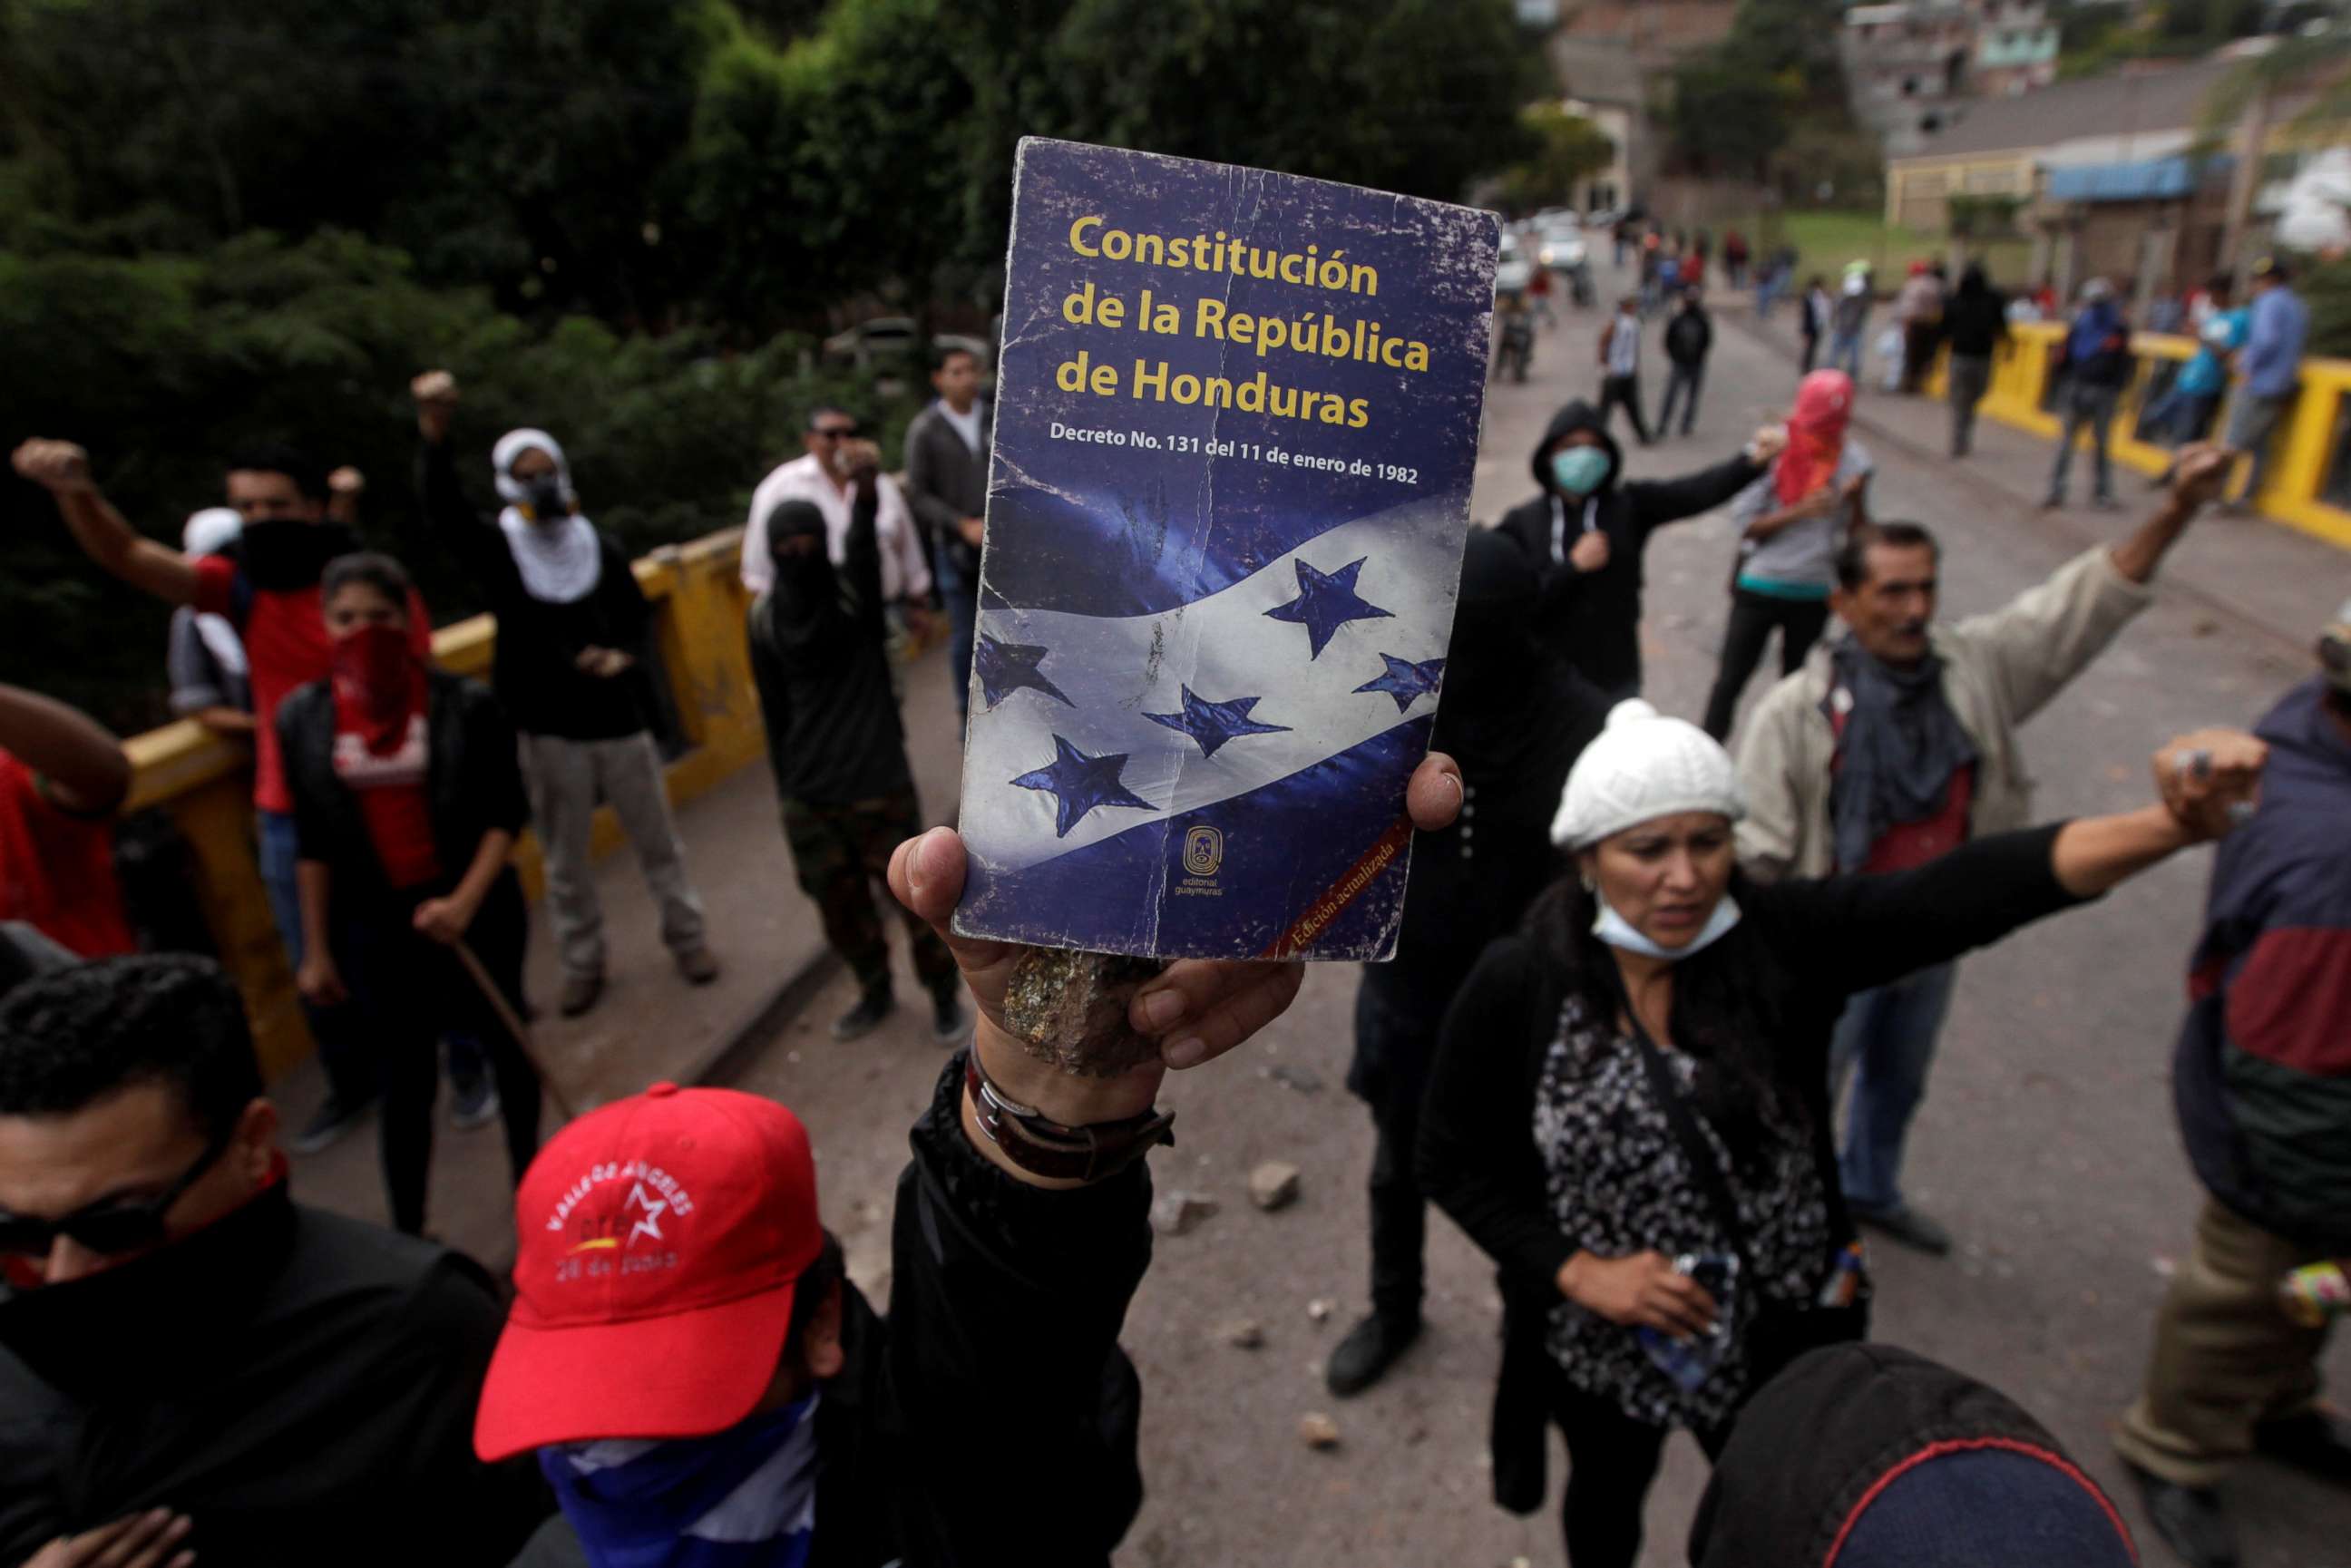 PHOTO: An opposition supporter holds up the Constitution of the Republic of Honduras during a protest over a contested presidential election with allegations of electoral fraud in Tegucigalpa, Honduras, Dec. 22, 2017. 